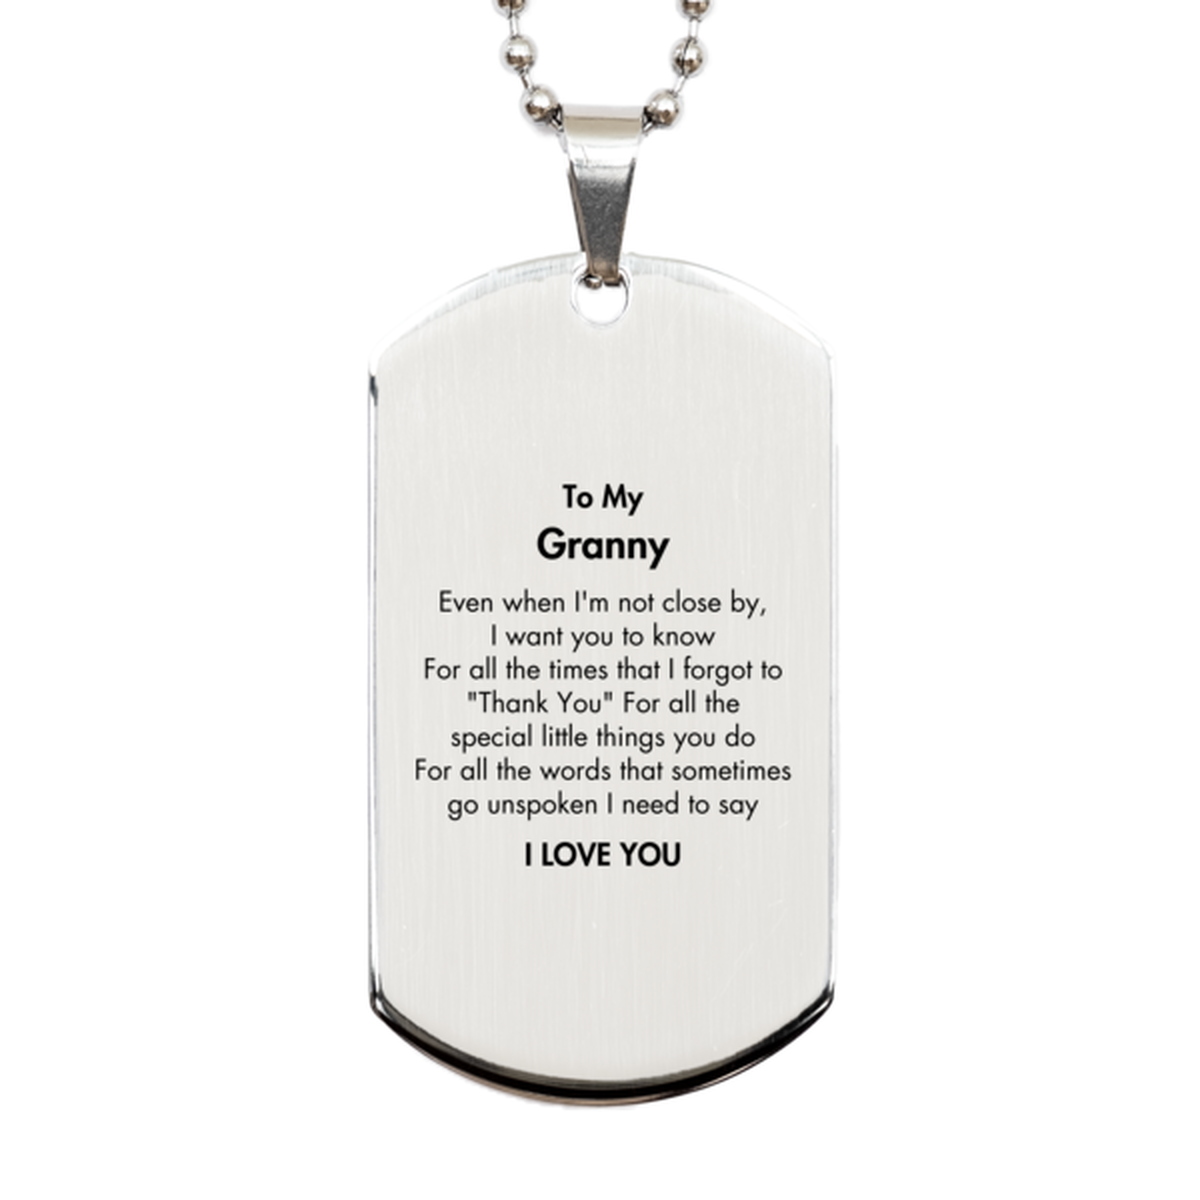 Thank You Gifts for Granny, Keepsake Silver Dog Tag Gifts for Granny Birthday Mother's day Father's Day Granny For all the words That sometimes go unspoken I need to say I LOVE YOU